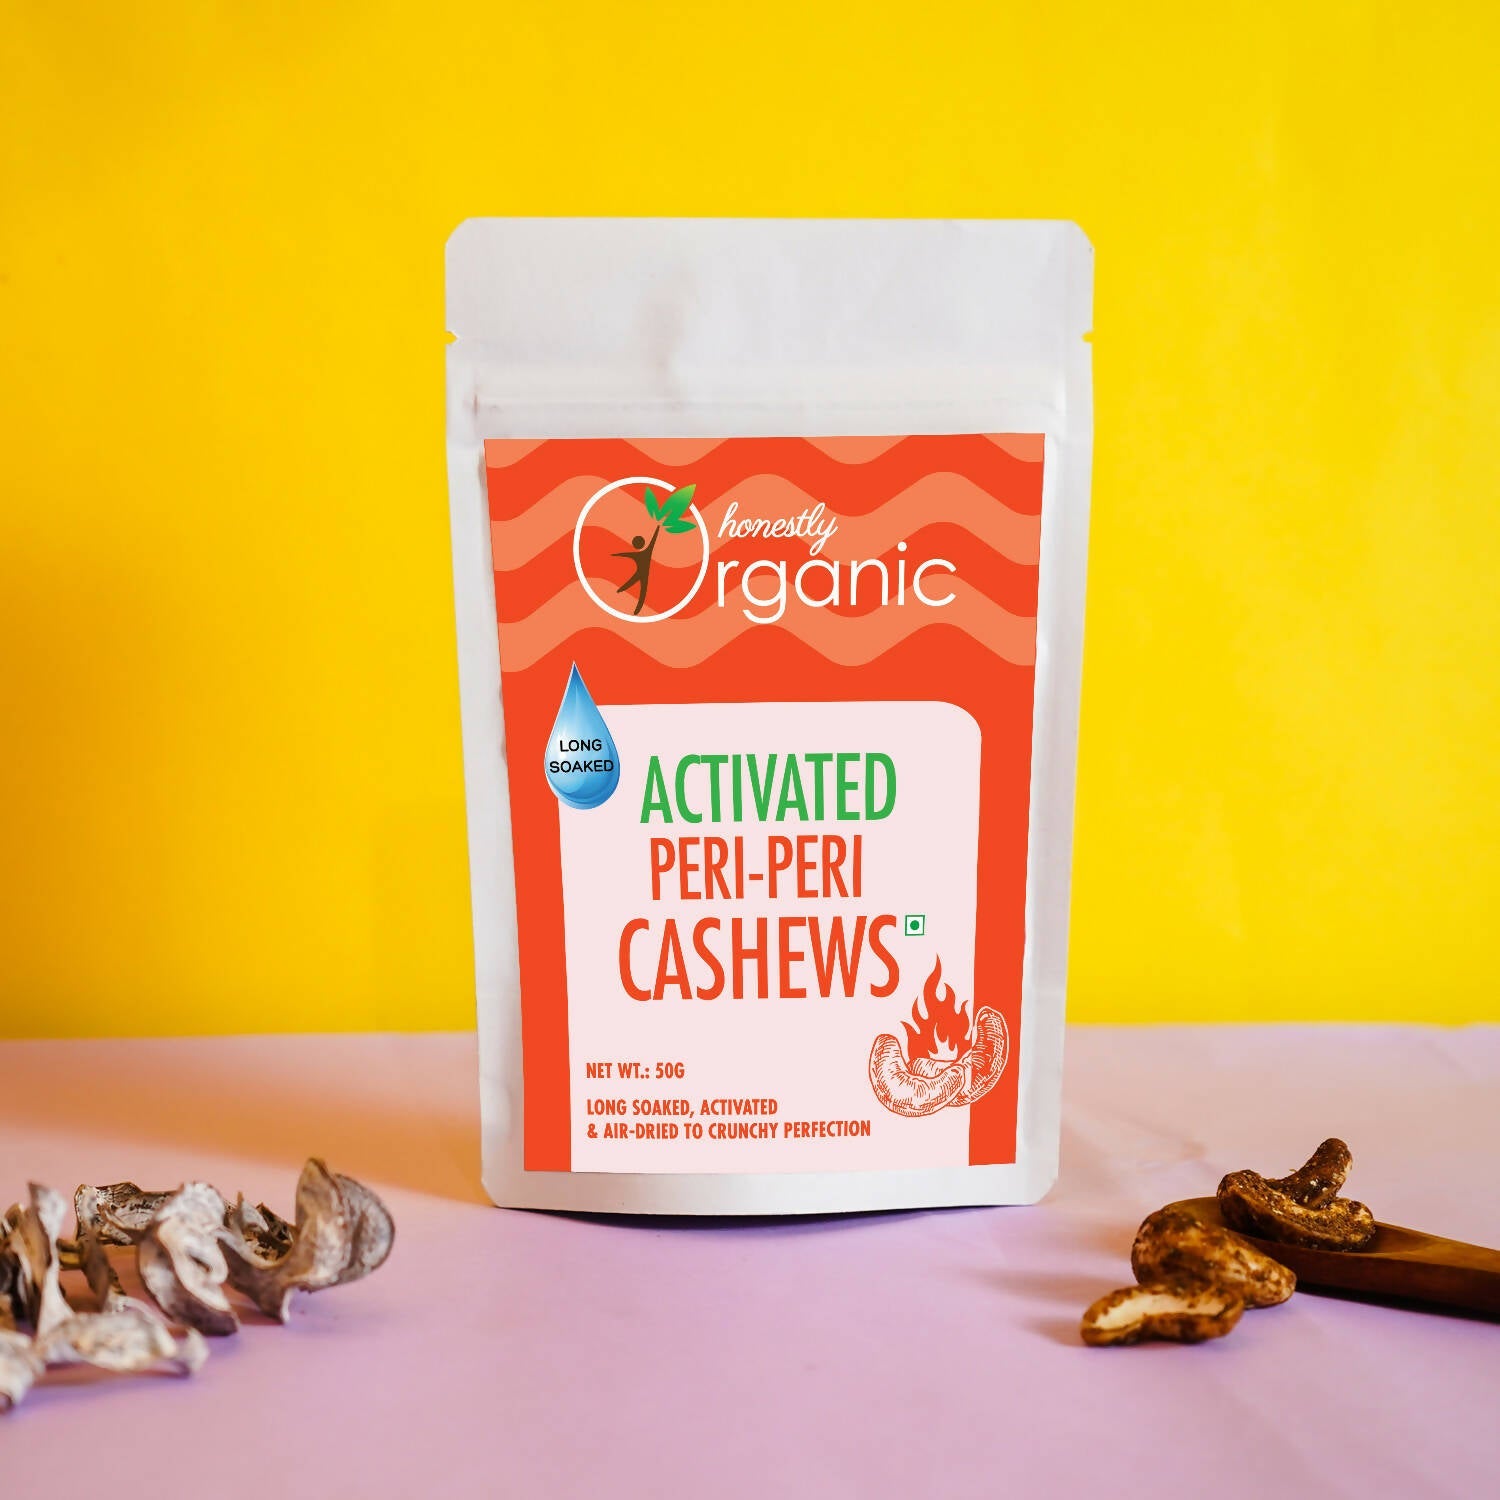 Activated Peri Peri - Cashews (100% Natural & Fresh, Long Soaked & Air Dried to Crunchy Perfection) - 50g (Pack of 2) Wemy Store